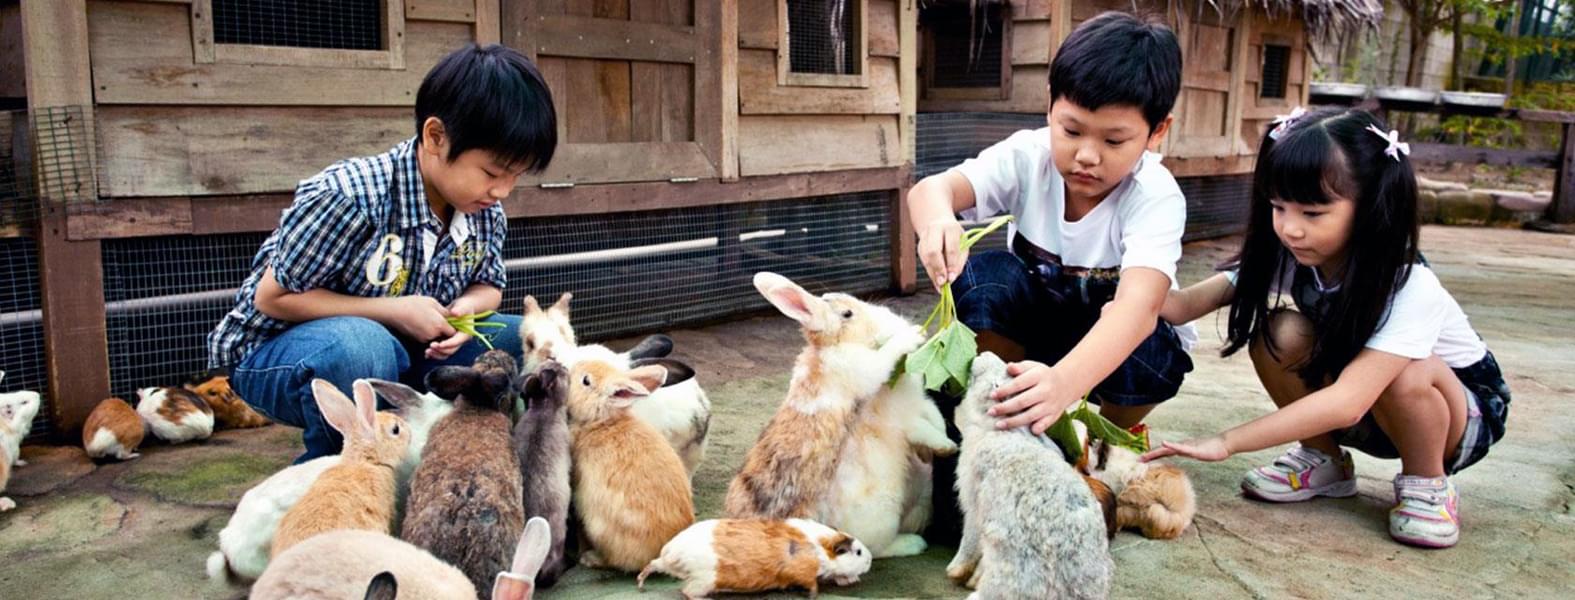 Let your kids interact and feed the fluffy and playful bunnies